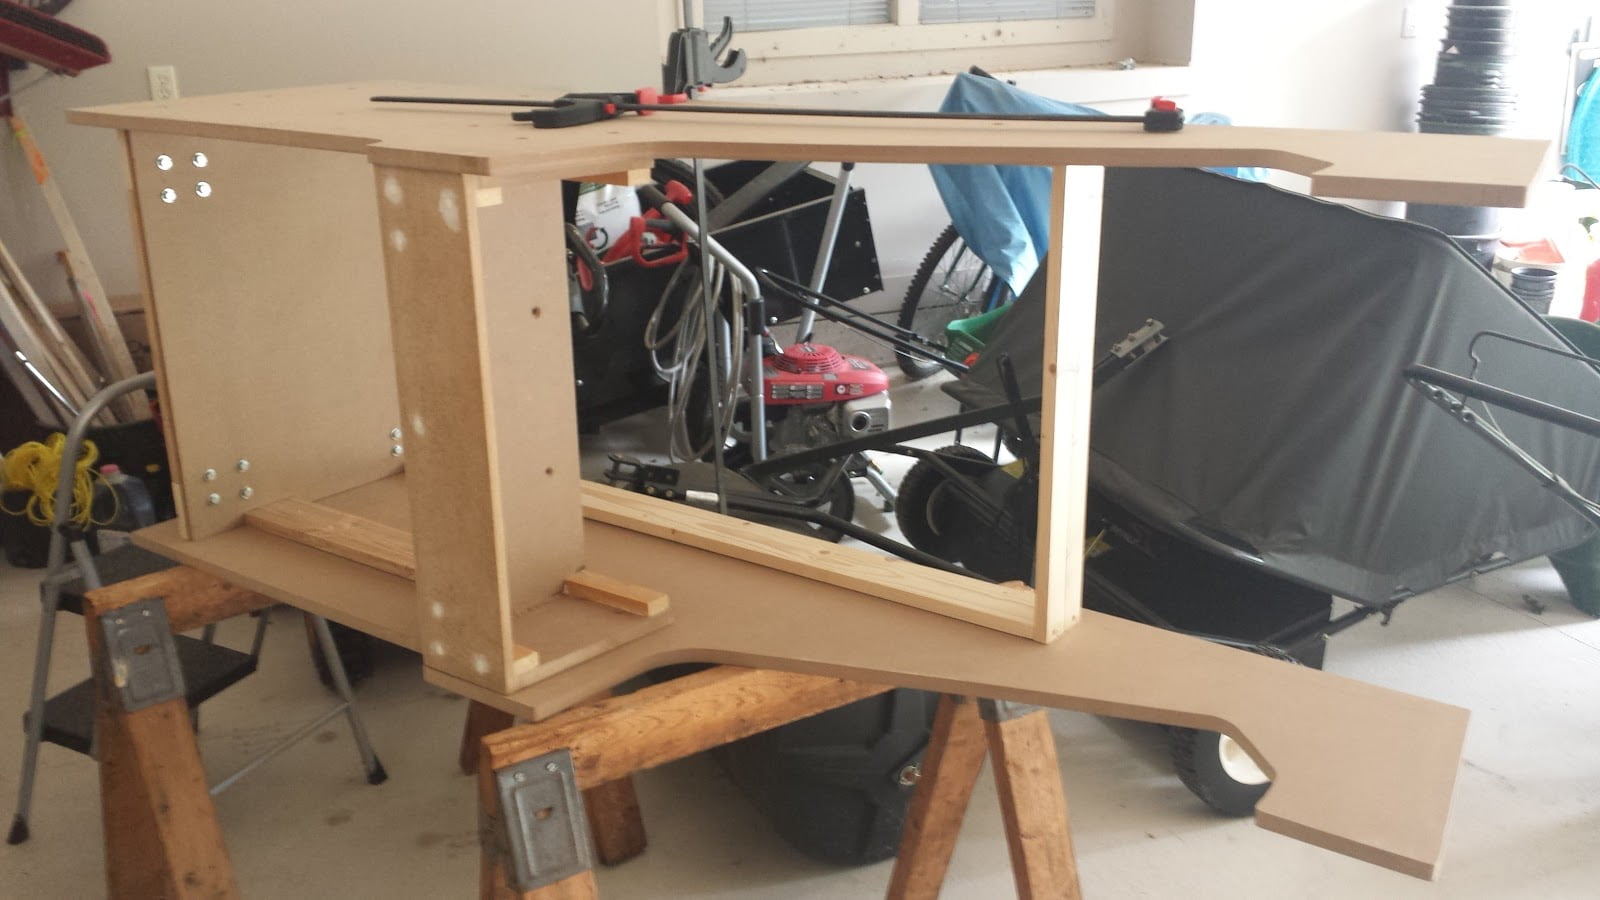 Partially-assembled arcade cabinet, lying on its side on a pair of sawhorses